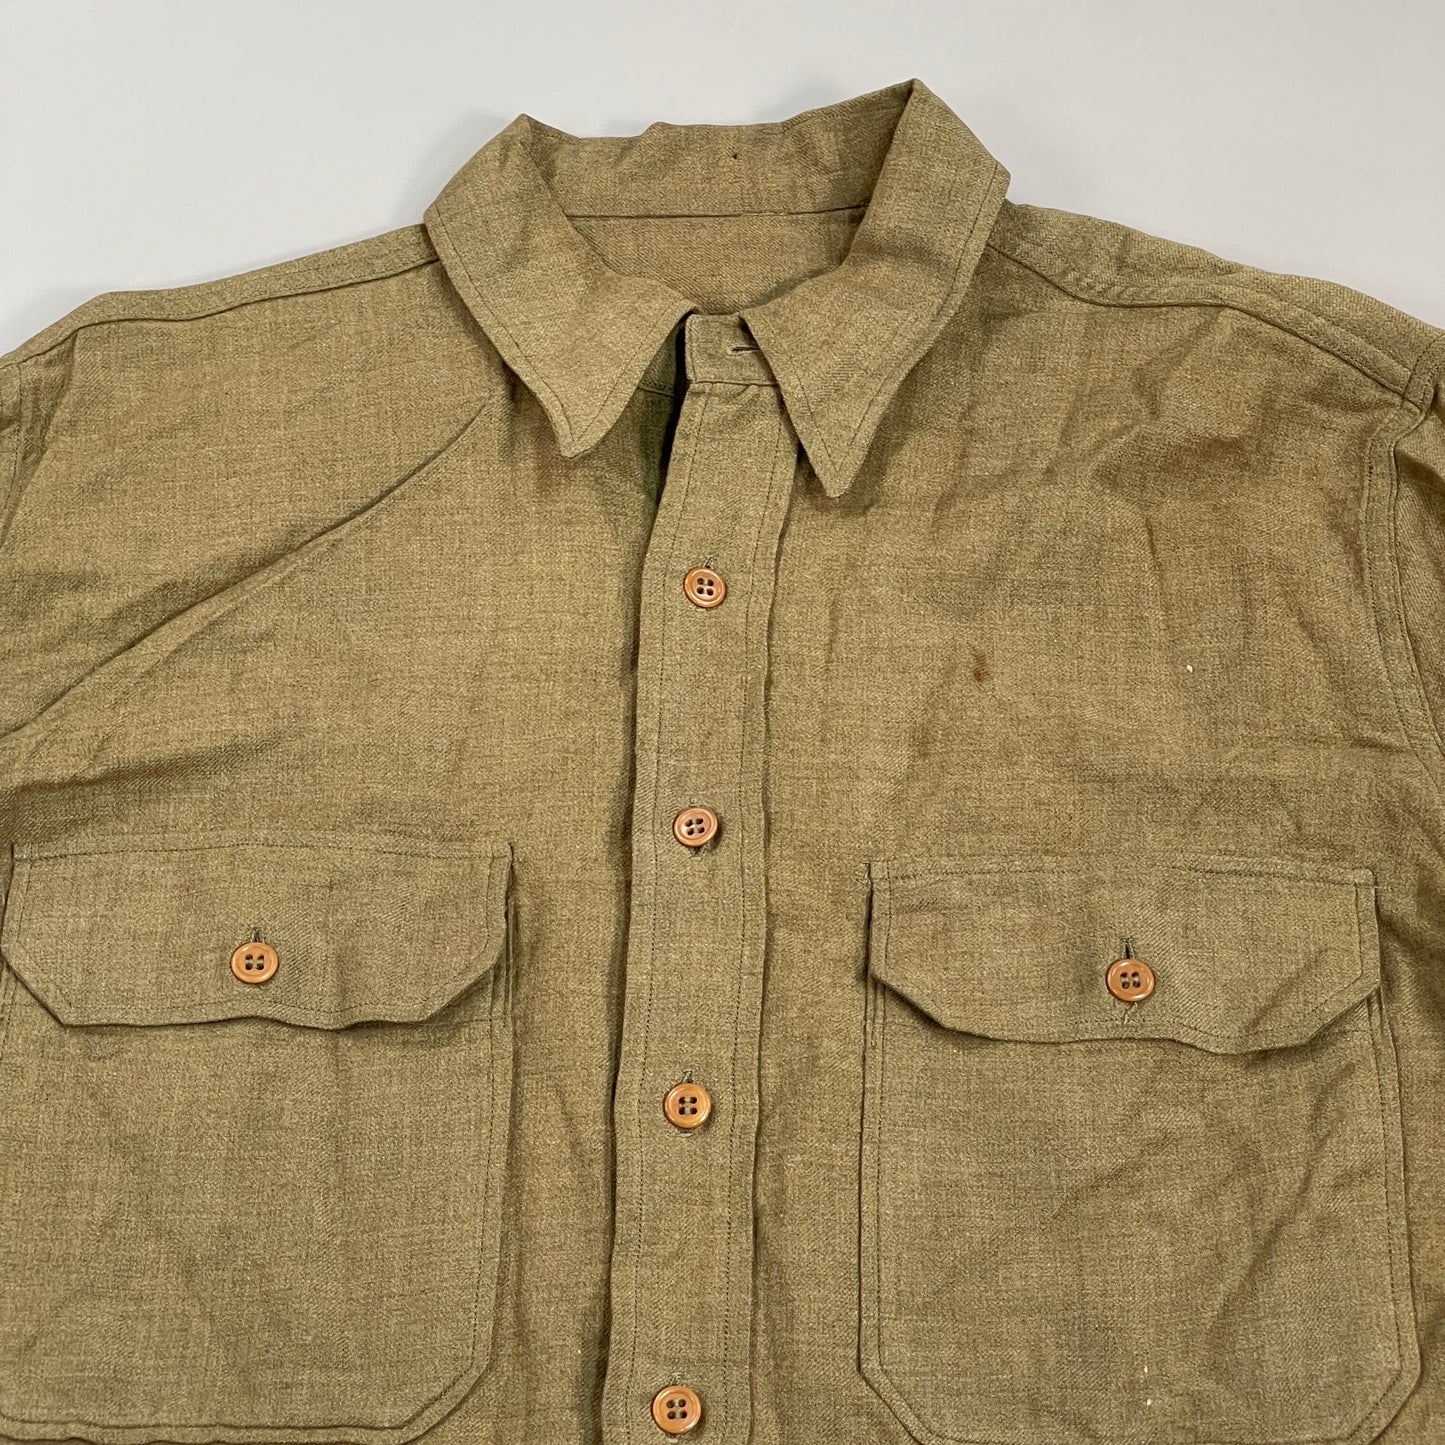 WWII U.S. ARMY 13th AIRBORNE DIVISION Golden Unicorn Patch Button-Down Shirt VINTAGE Men's Sz M Green (Pre-Owned)